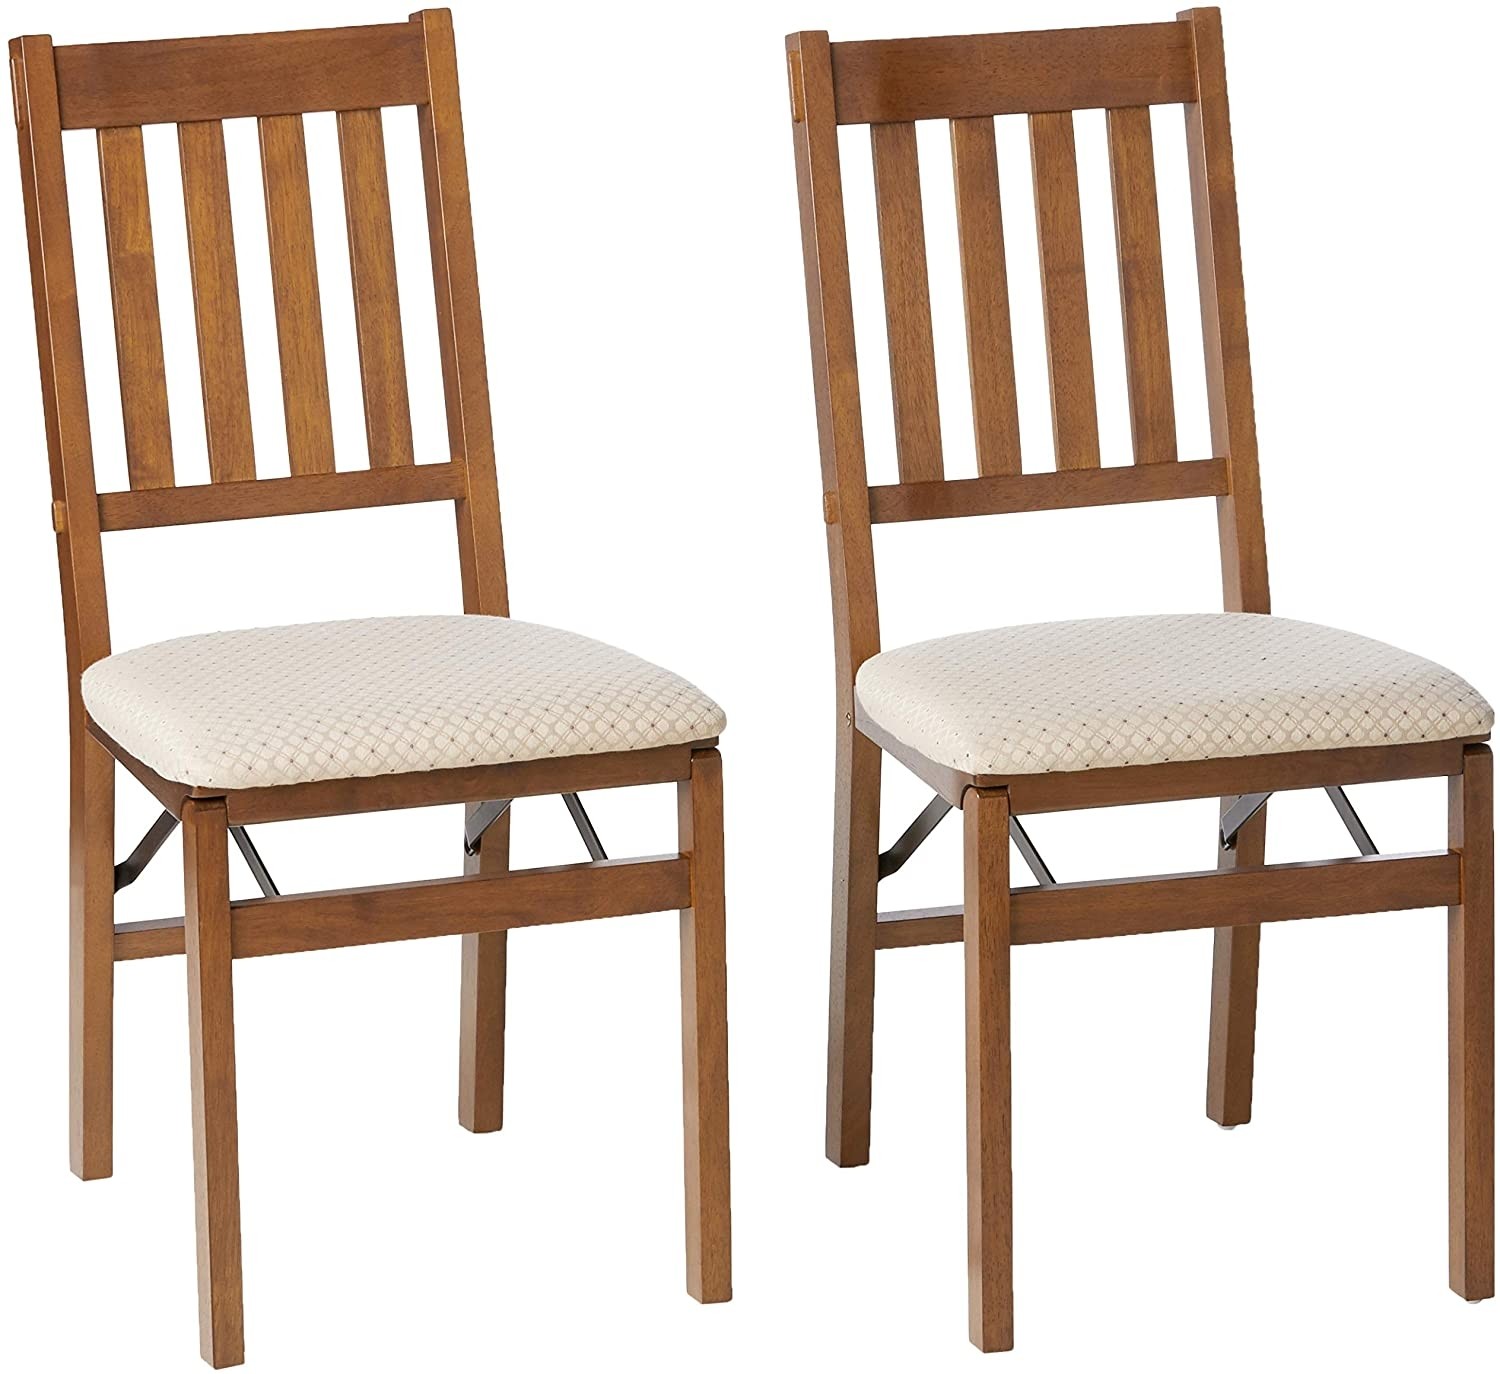 Stakmore folding chairs 1